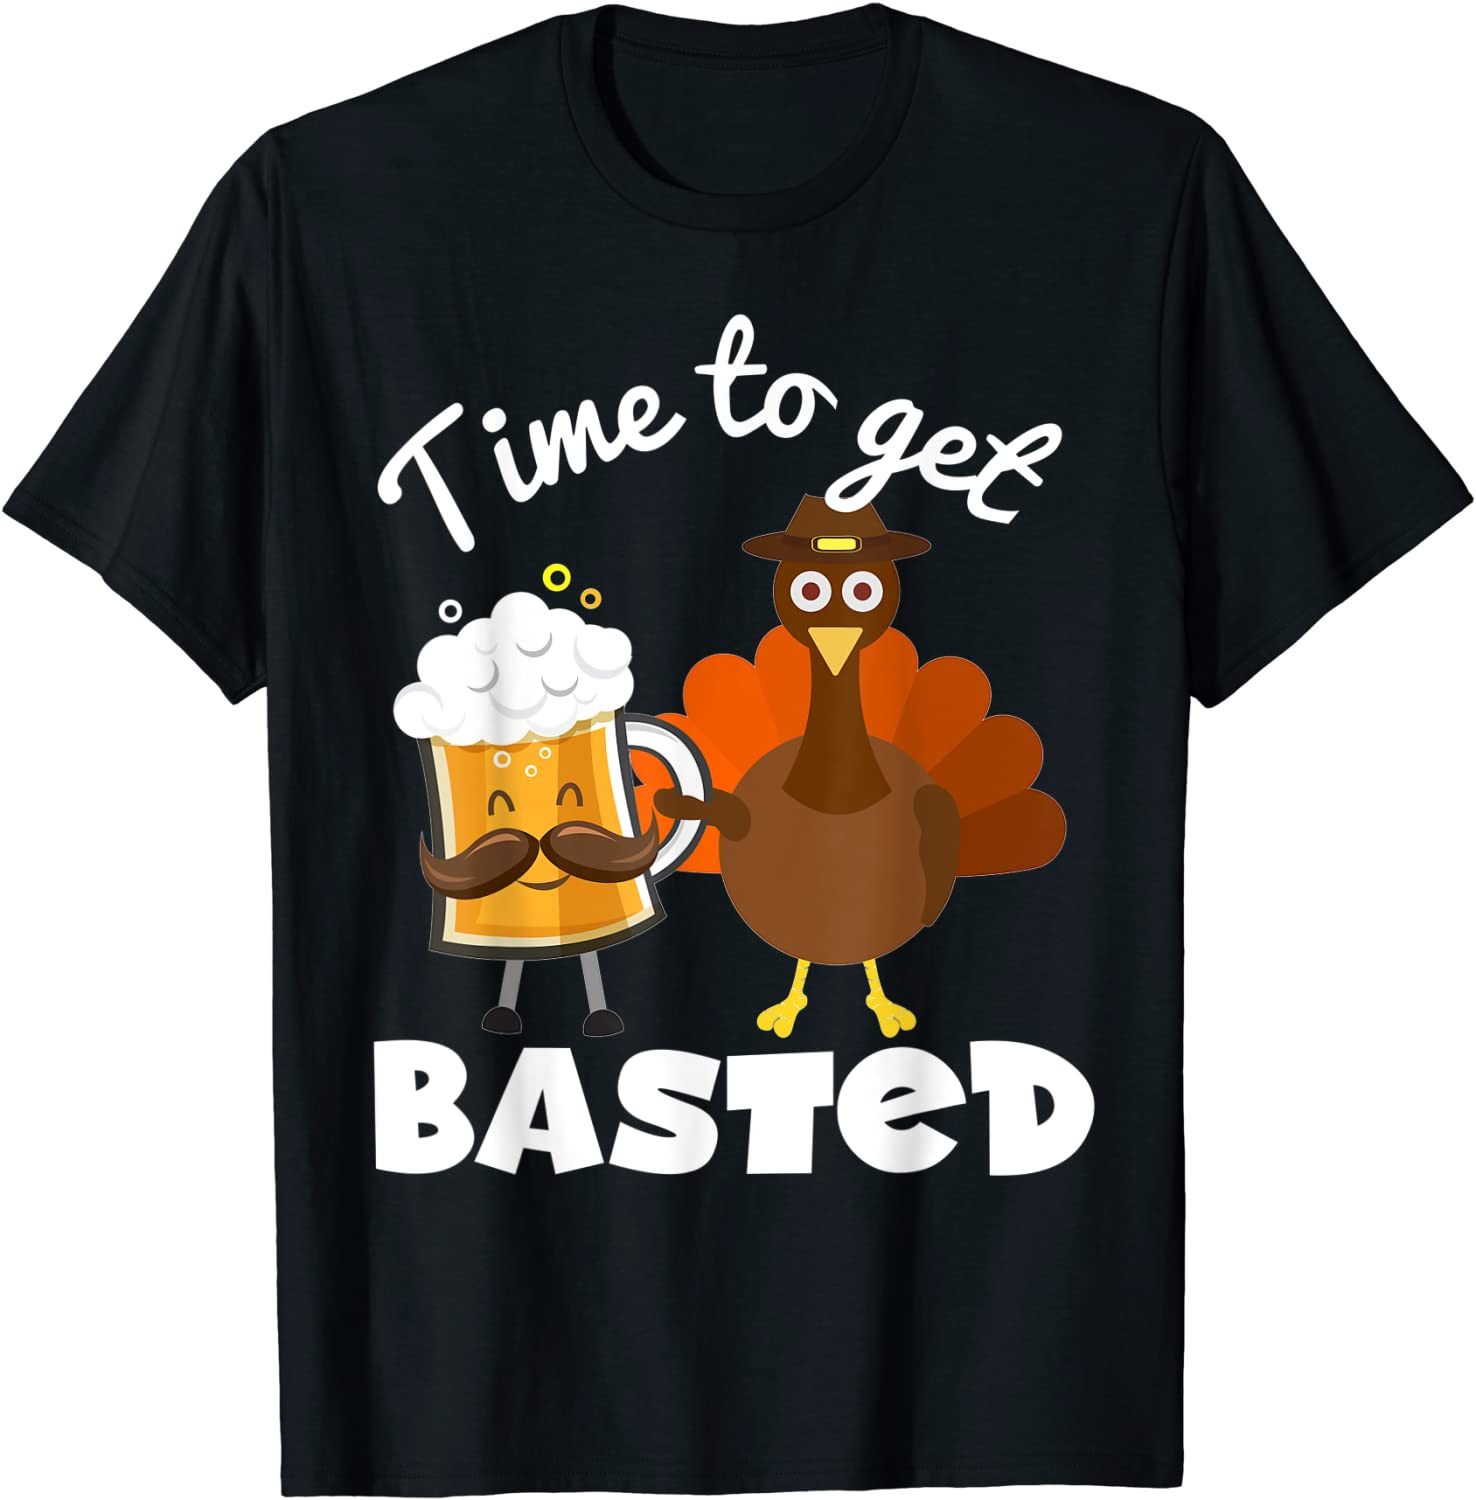 Funny Thanksgiving - Time To Get Basted Pun T-Shirt